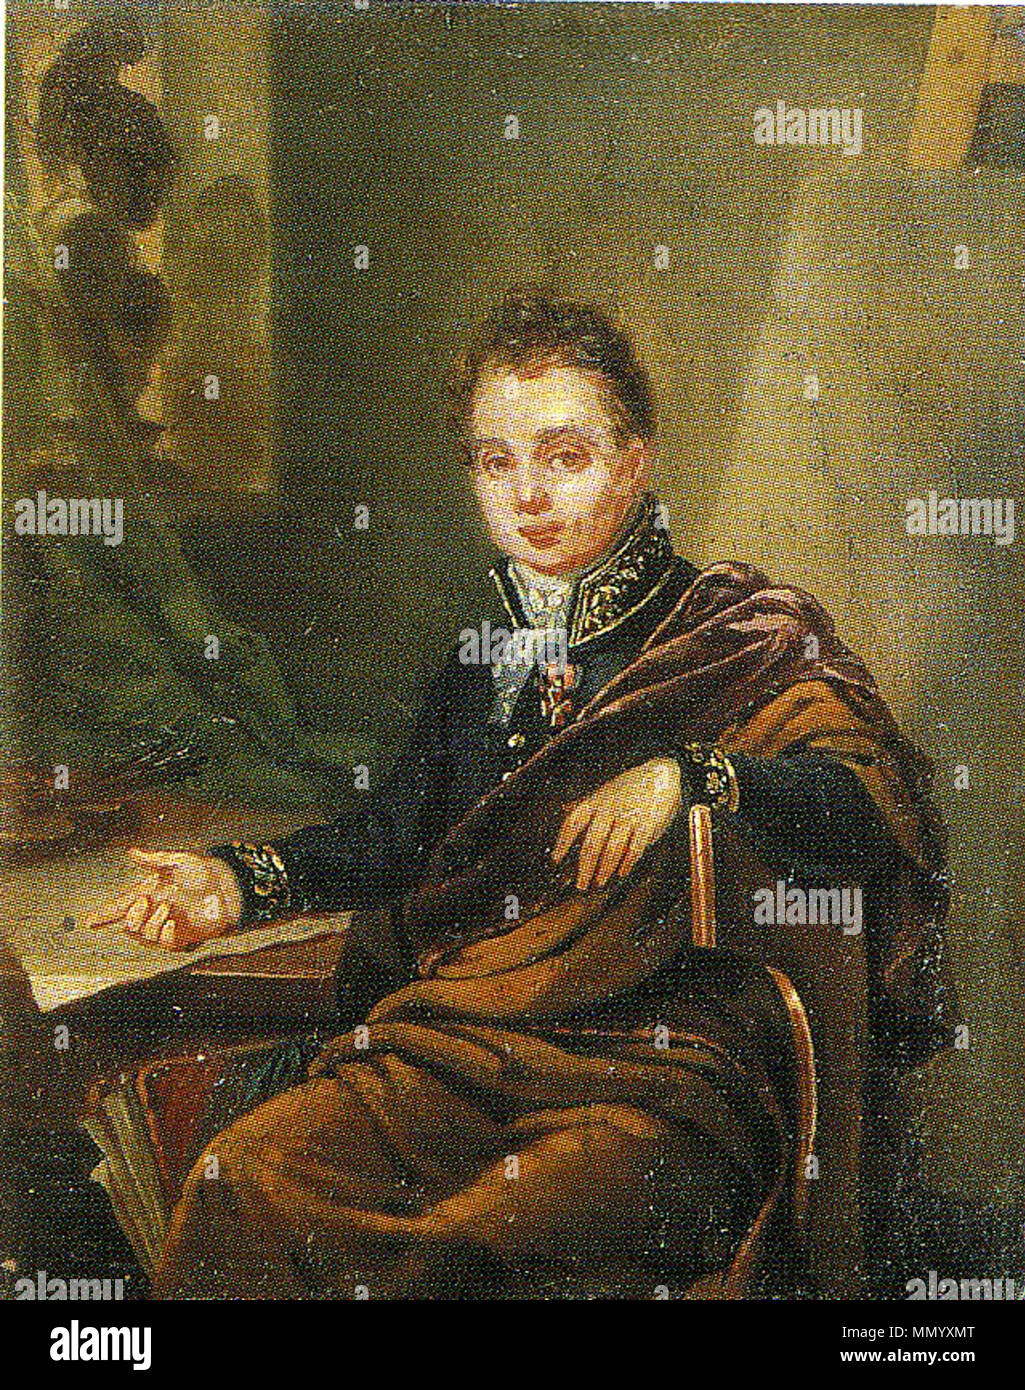 . Портрет А.И. Иванова, профессора АХ. 1824 ГРМ  . 1824.   Ivan Bugaevskiy-Blagodarniy  (1773–1859)     Alternative names English: The information about the life of the painter is fragmentary and discrepant. In particular, there are variants of the spelling of his family name: Bugaevskiy or Bogaevskiy, Blagodarniy or Blagodatniy (Russian: ?????????? or ??????????, ??????????? or ???????????). As well, there are variants of the painter’s patronymic: Vasilievich or Semyonovich (Russian: ?????????? or ?????????). ???????: ??????????? ?????? ???????? ????????? ??????? ?????????: «??????????» ??? « Stock Photo